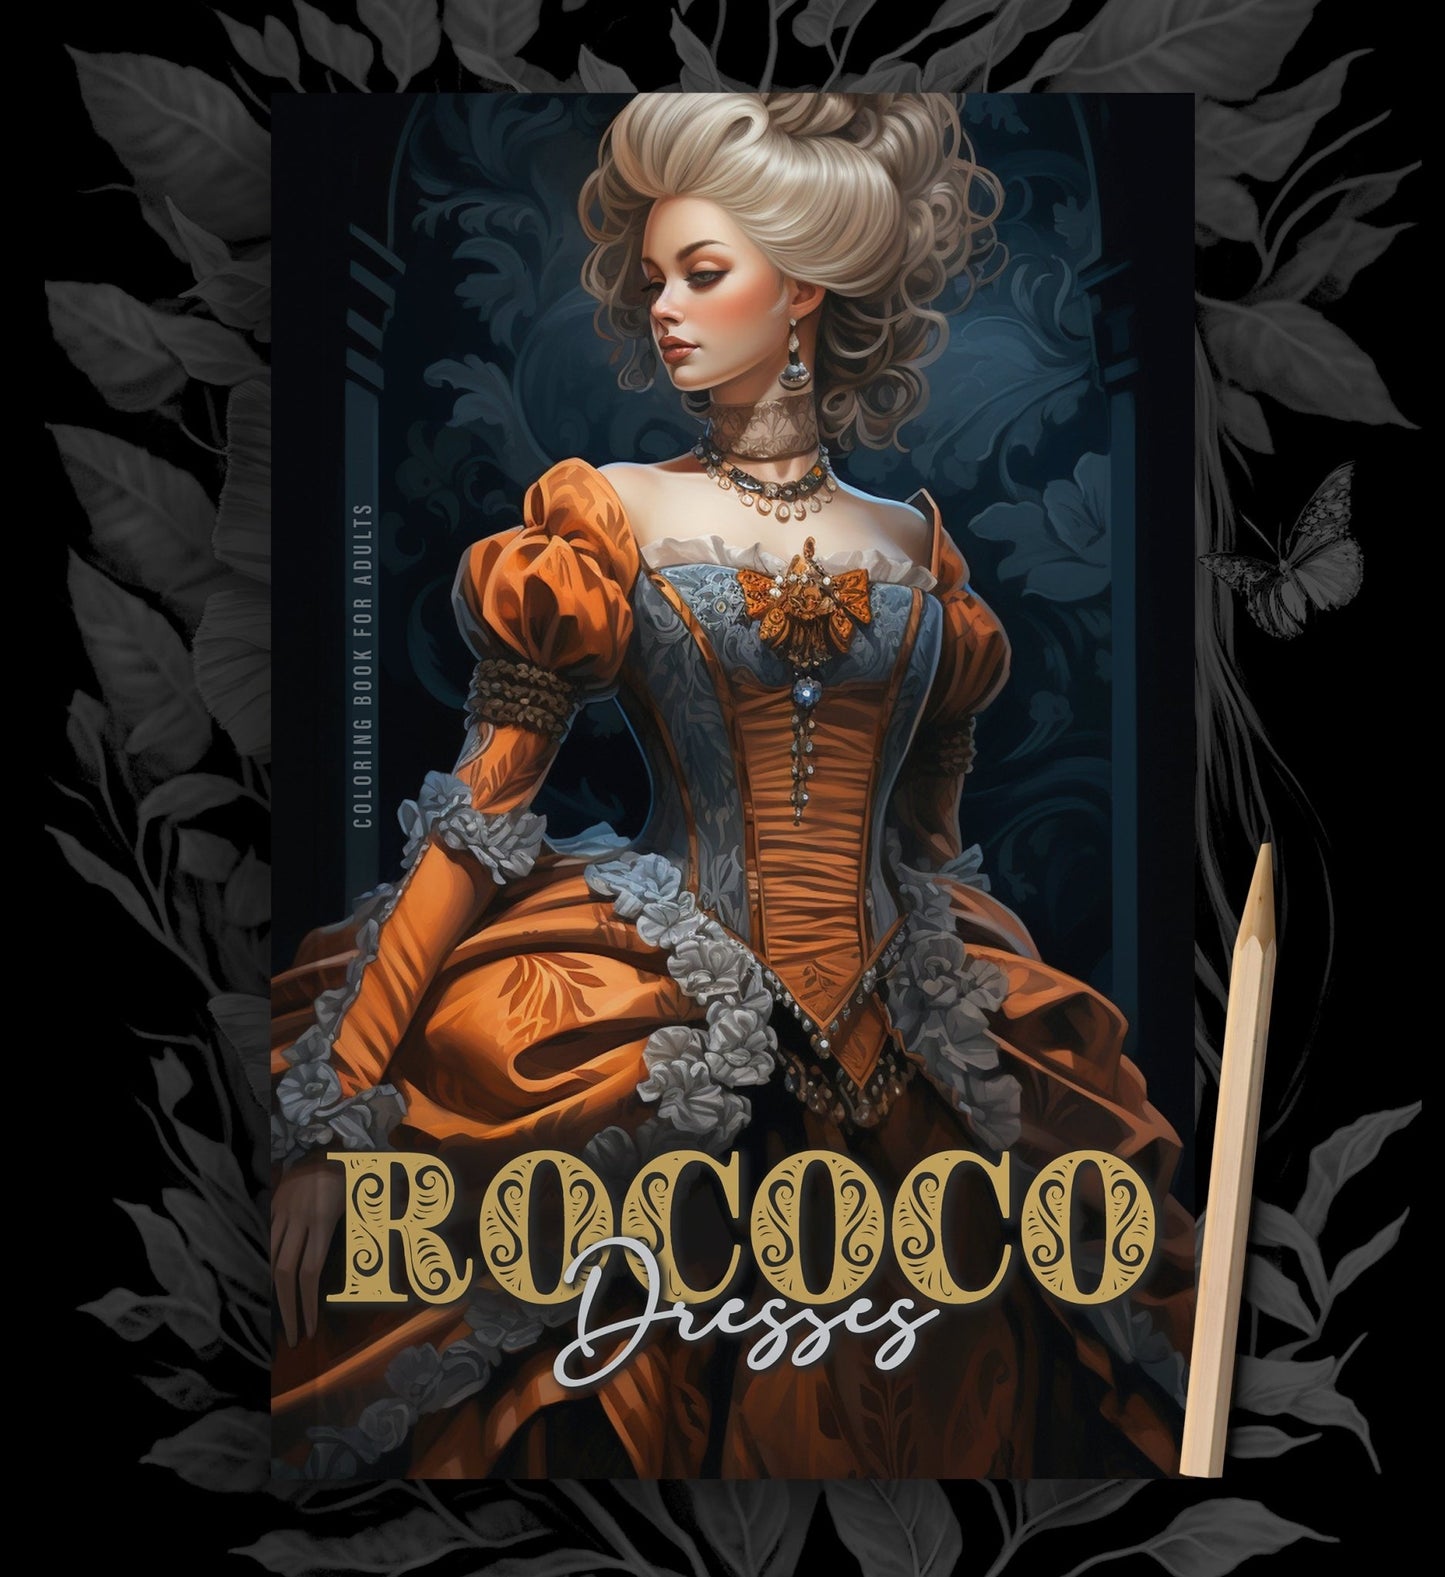 Rococo Dresses Coloring Book (Printbook) - Monsoon Publishing USA